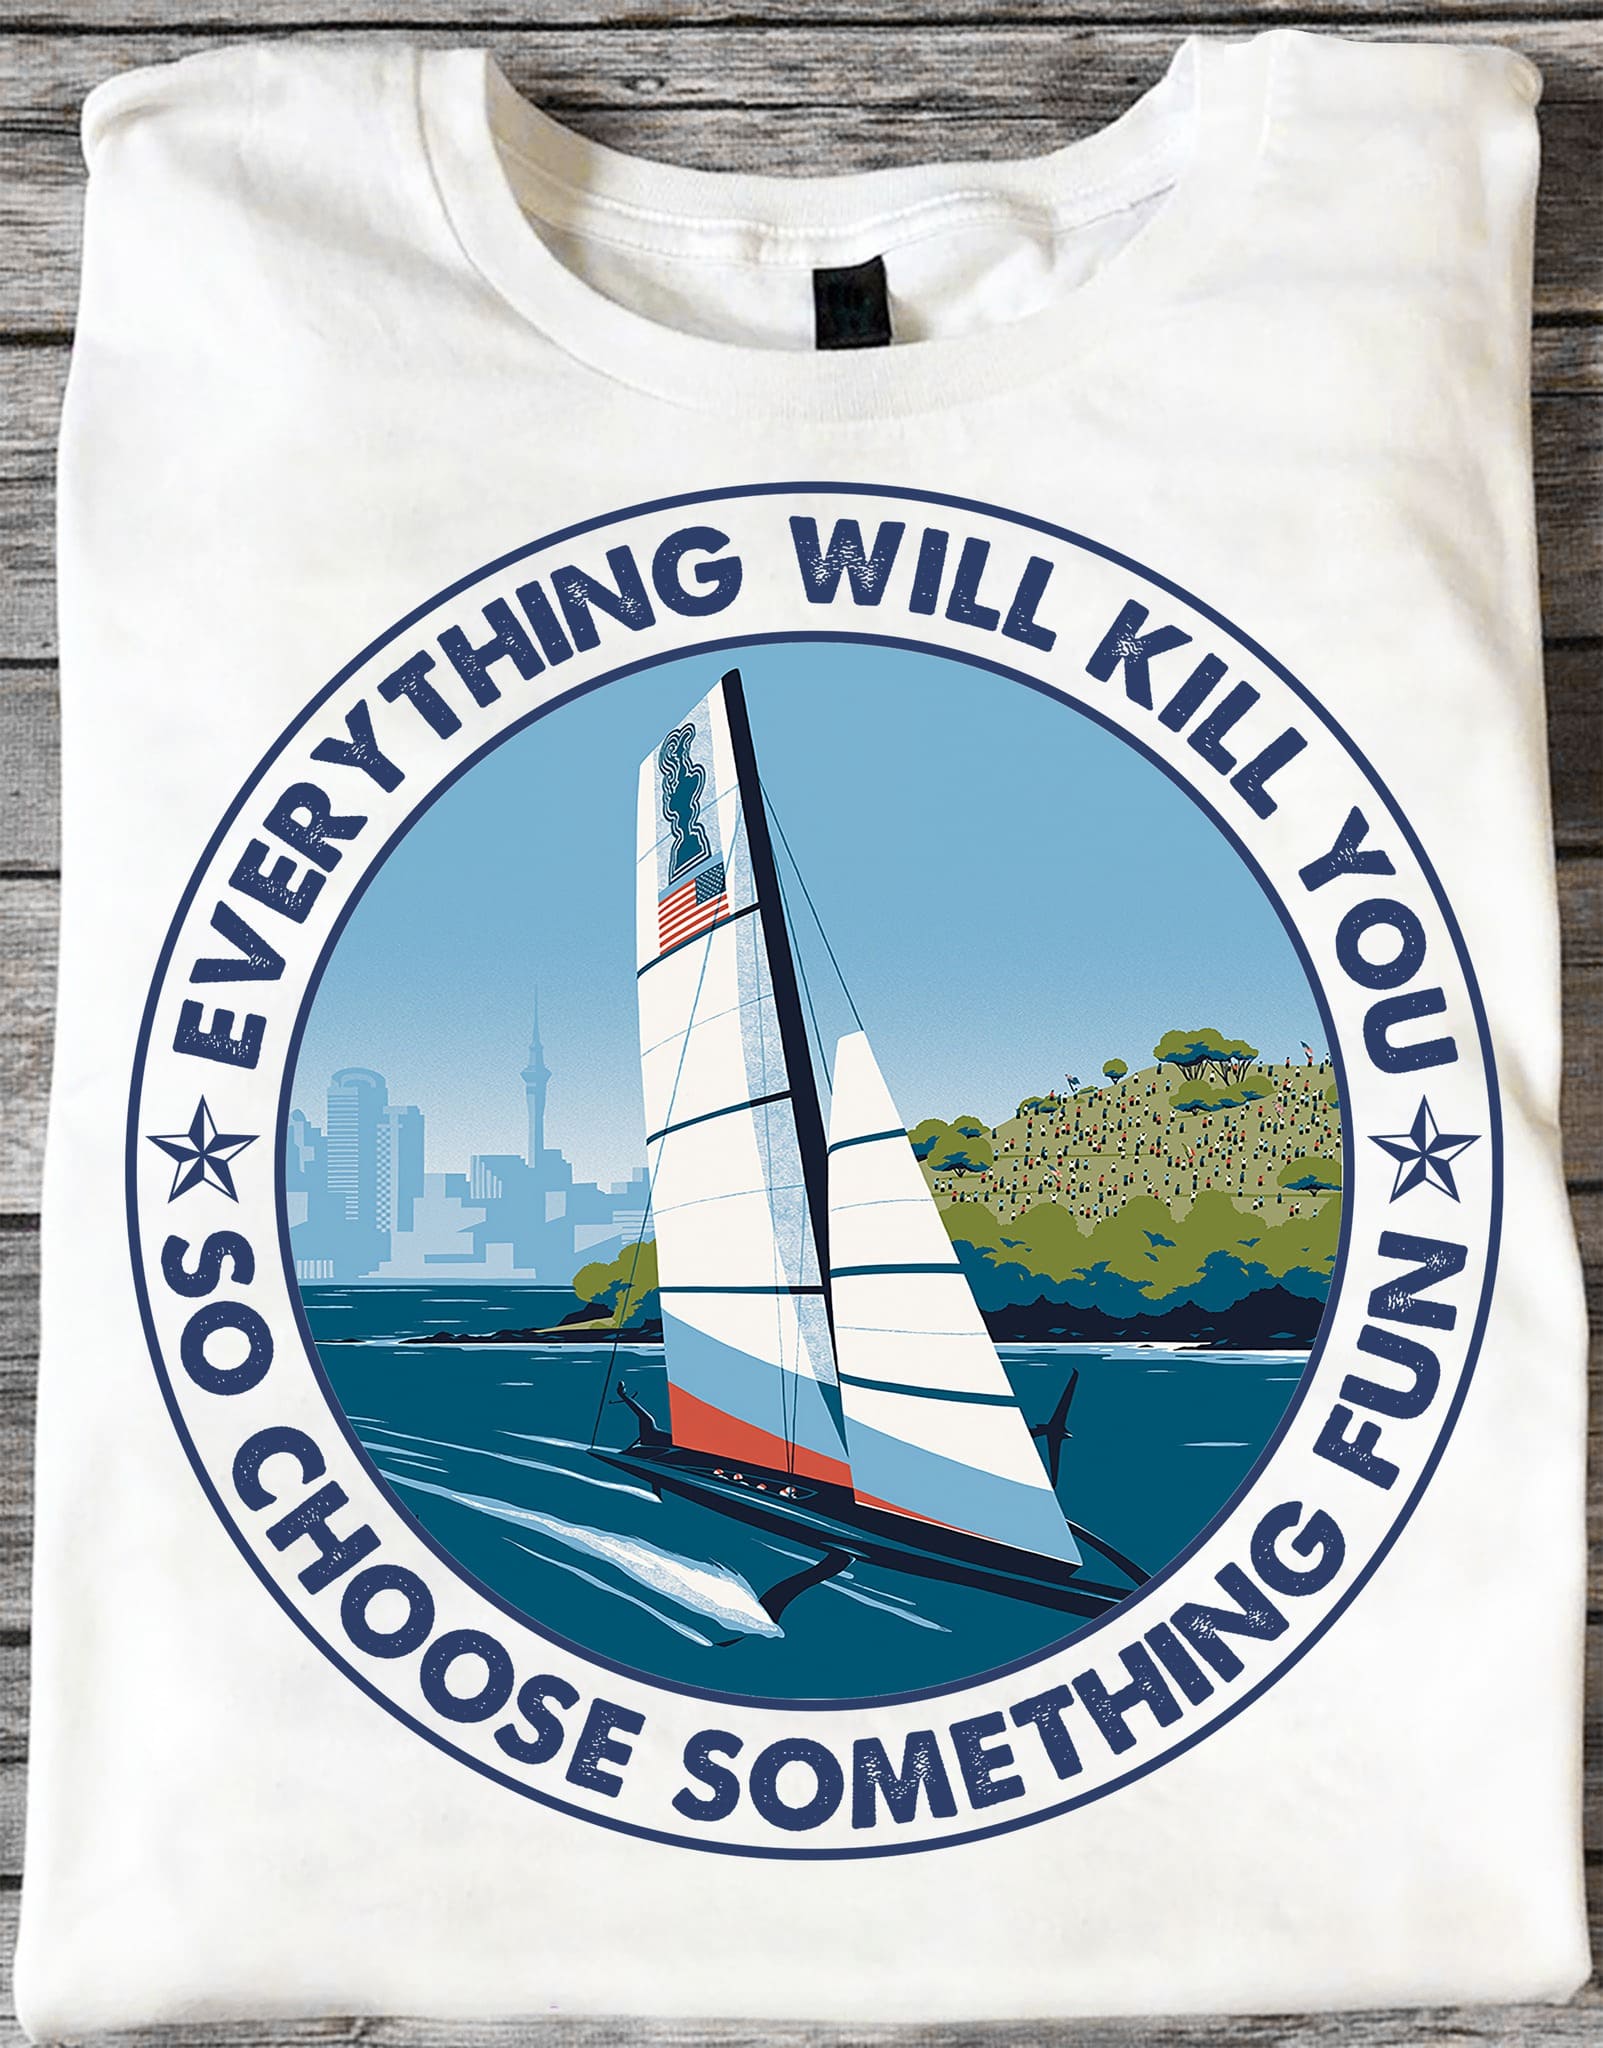 Everything will kill you so choose something fun - Gift for sailing person, chose sailing